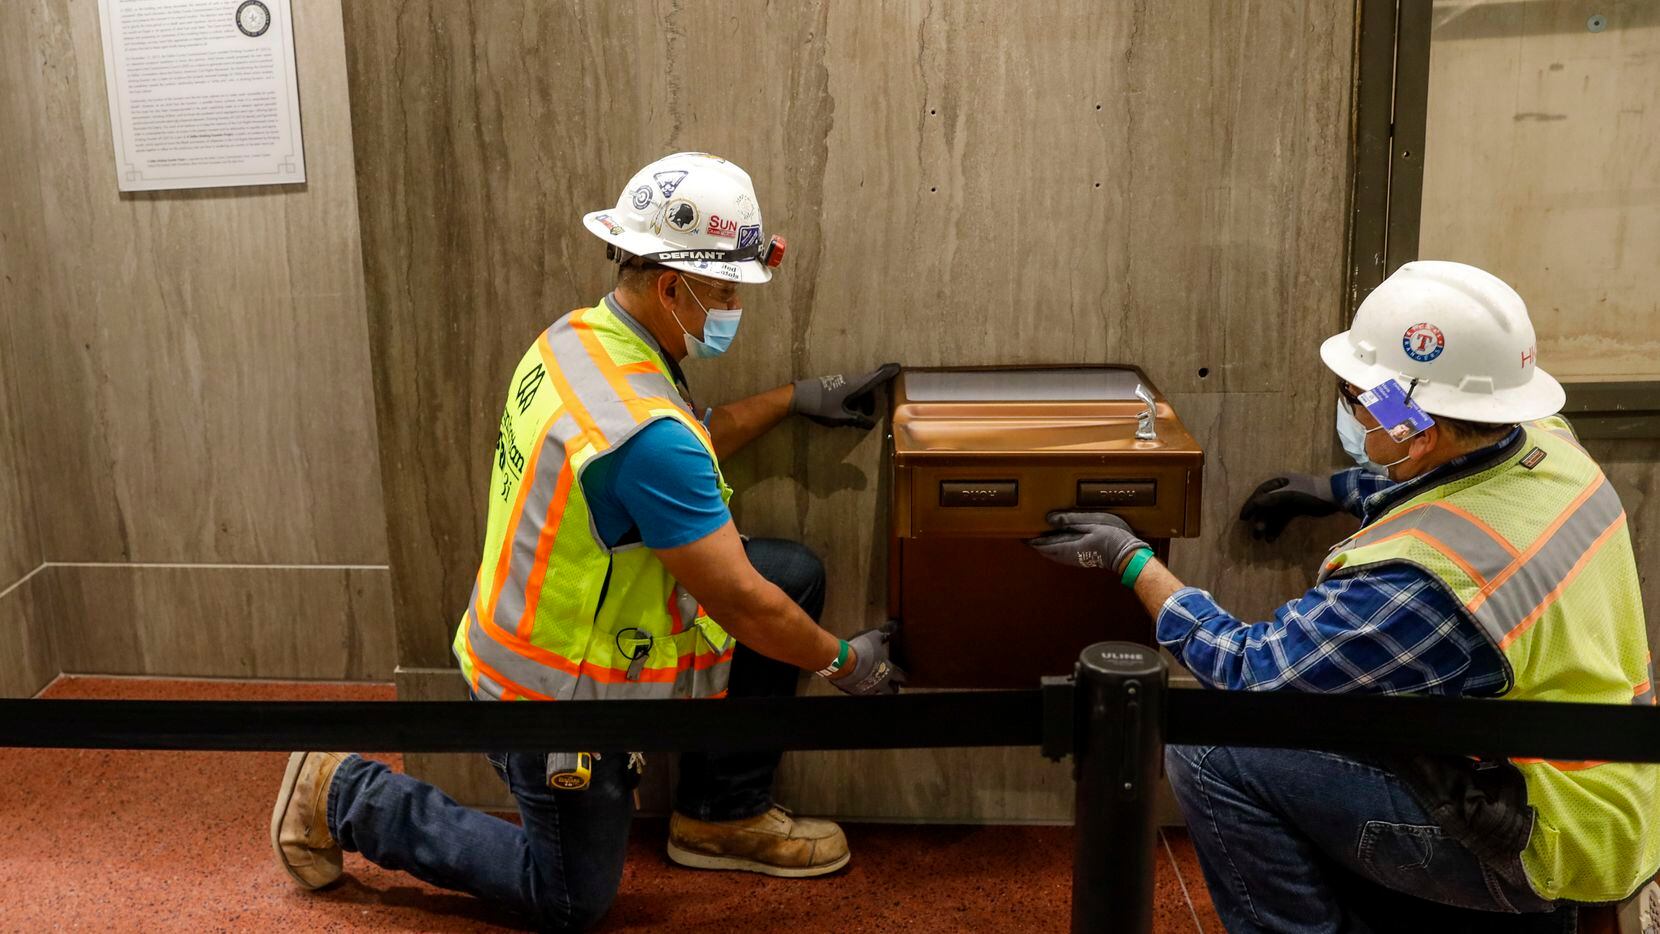 Saul Fuentes and Mario Vilatoro fit a segregation-era water fountain before it is sent for...